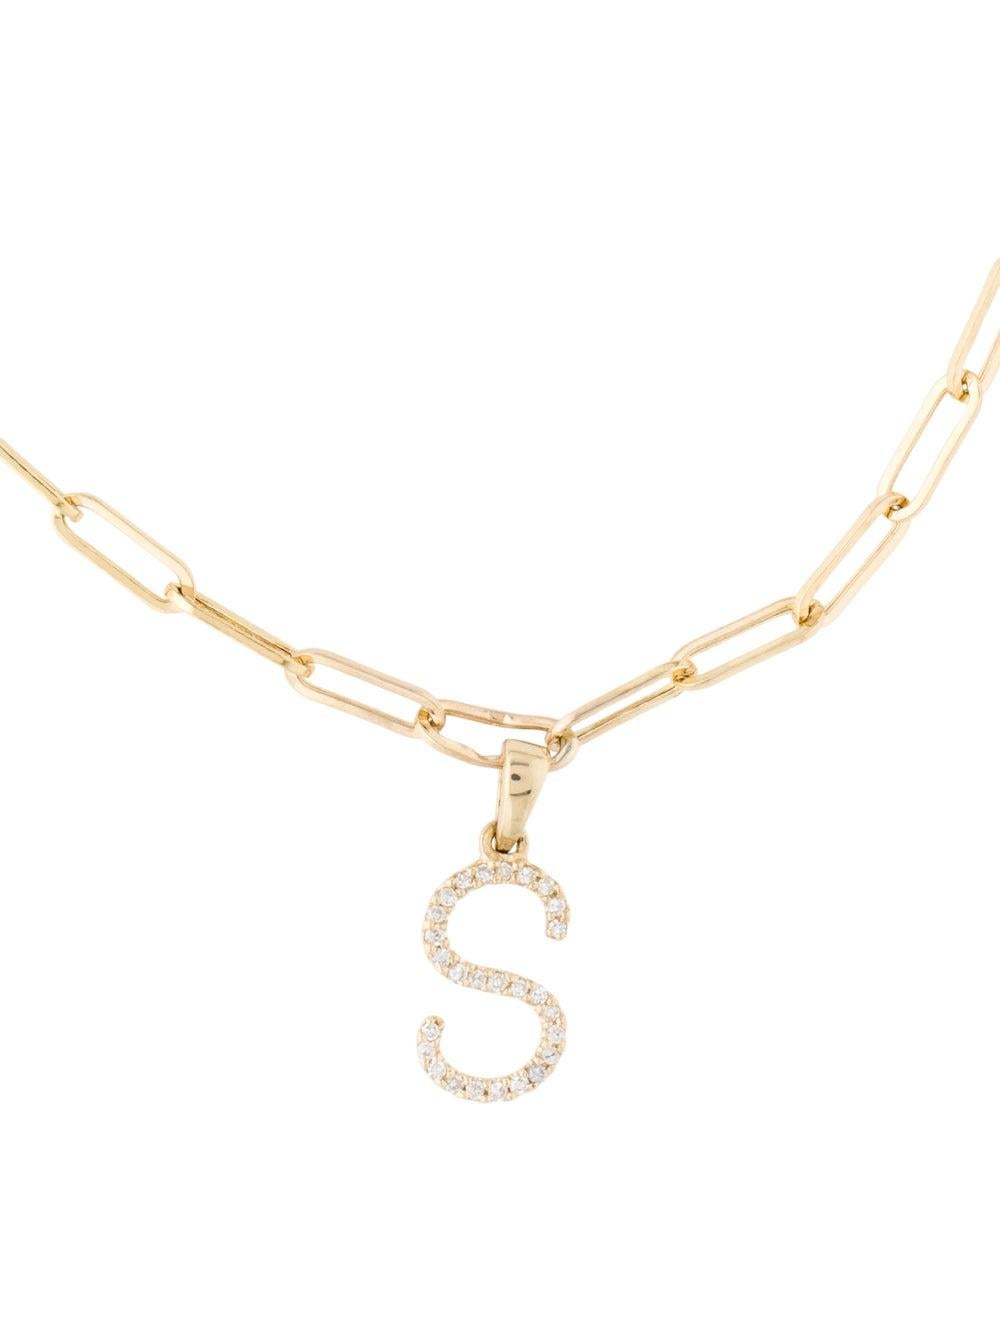 This is an adorable Initial Letter Bracelet crafted of 14k Yellow Gold with approximately 0.05 ct. Round Sparkly Diamonds. Diamond Color and Clarity GH-SI1-SI2. Comes on an 7